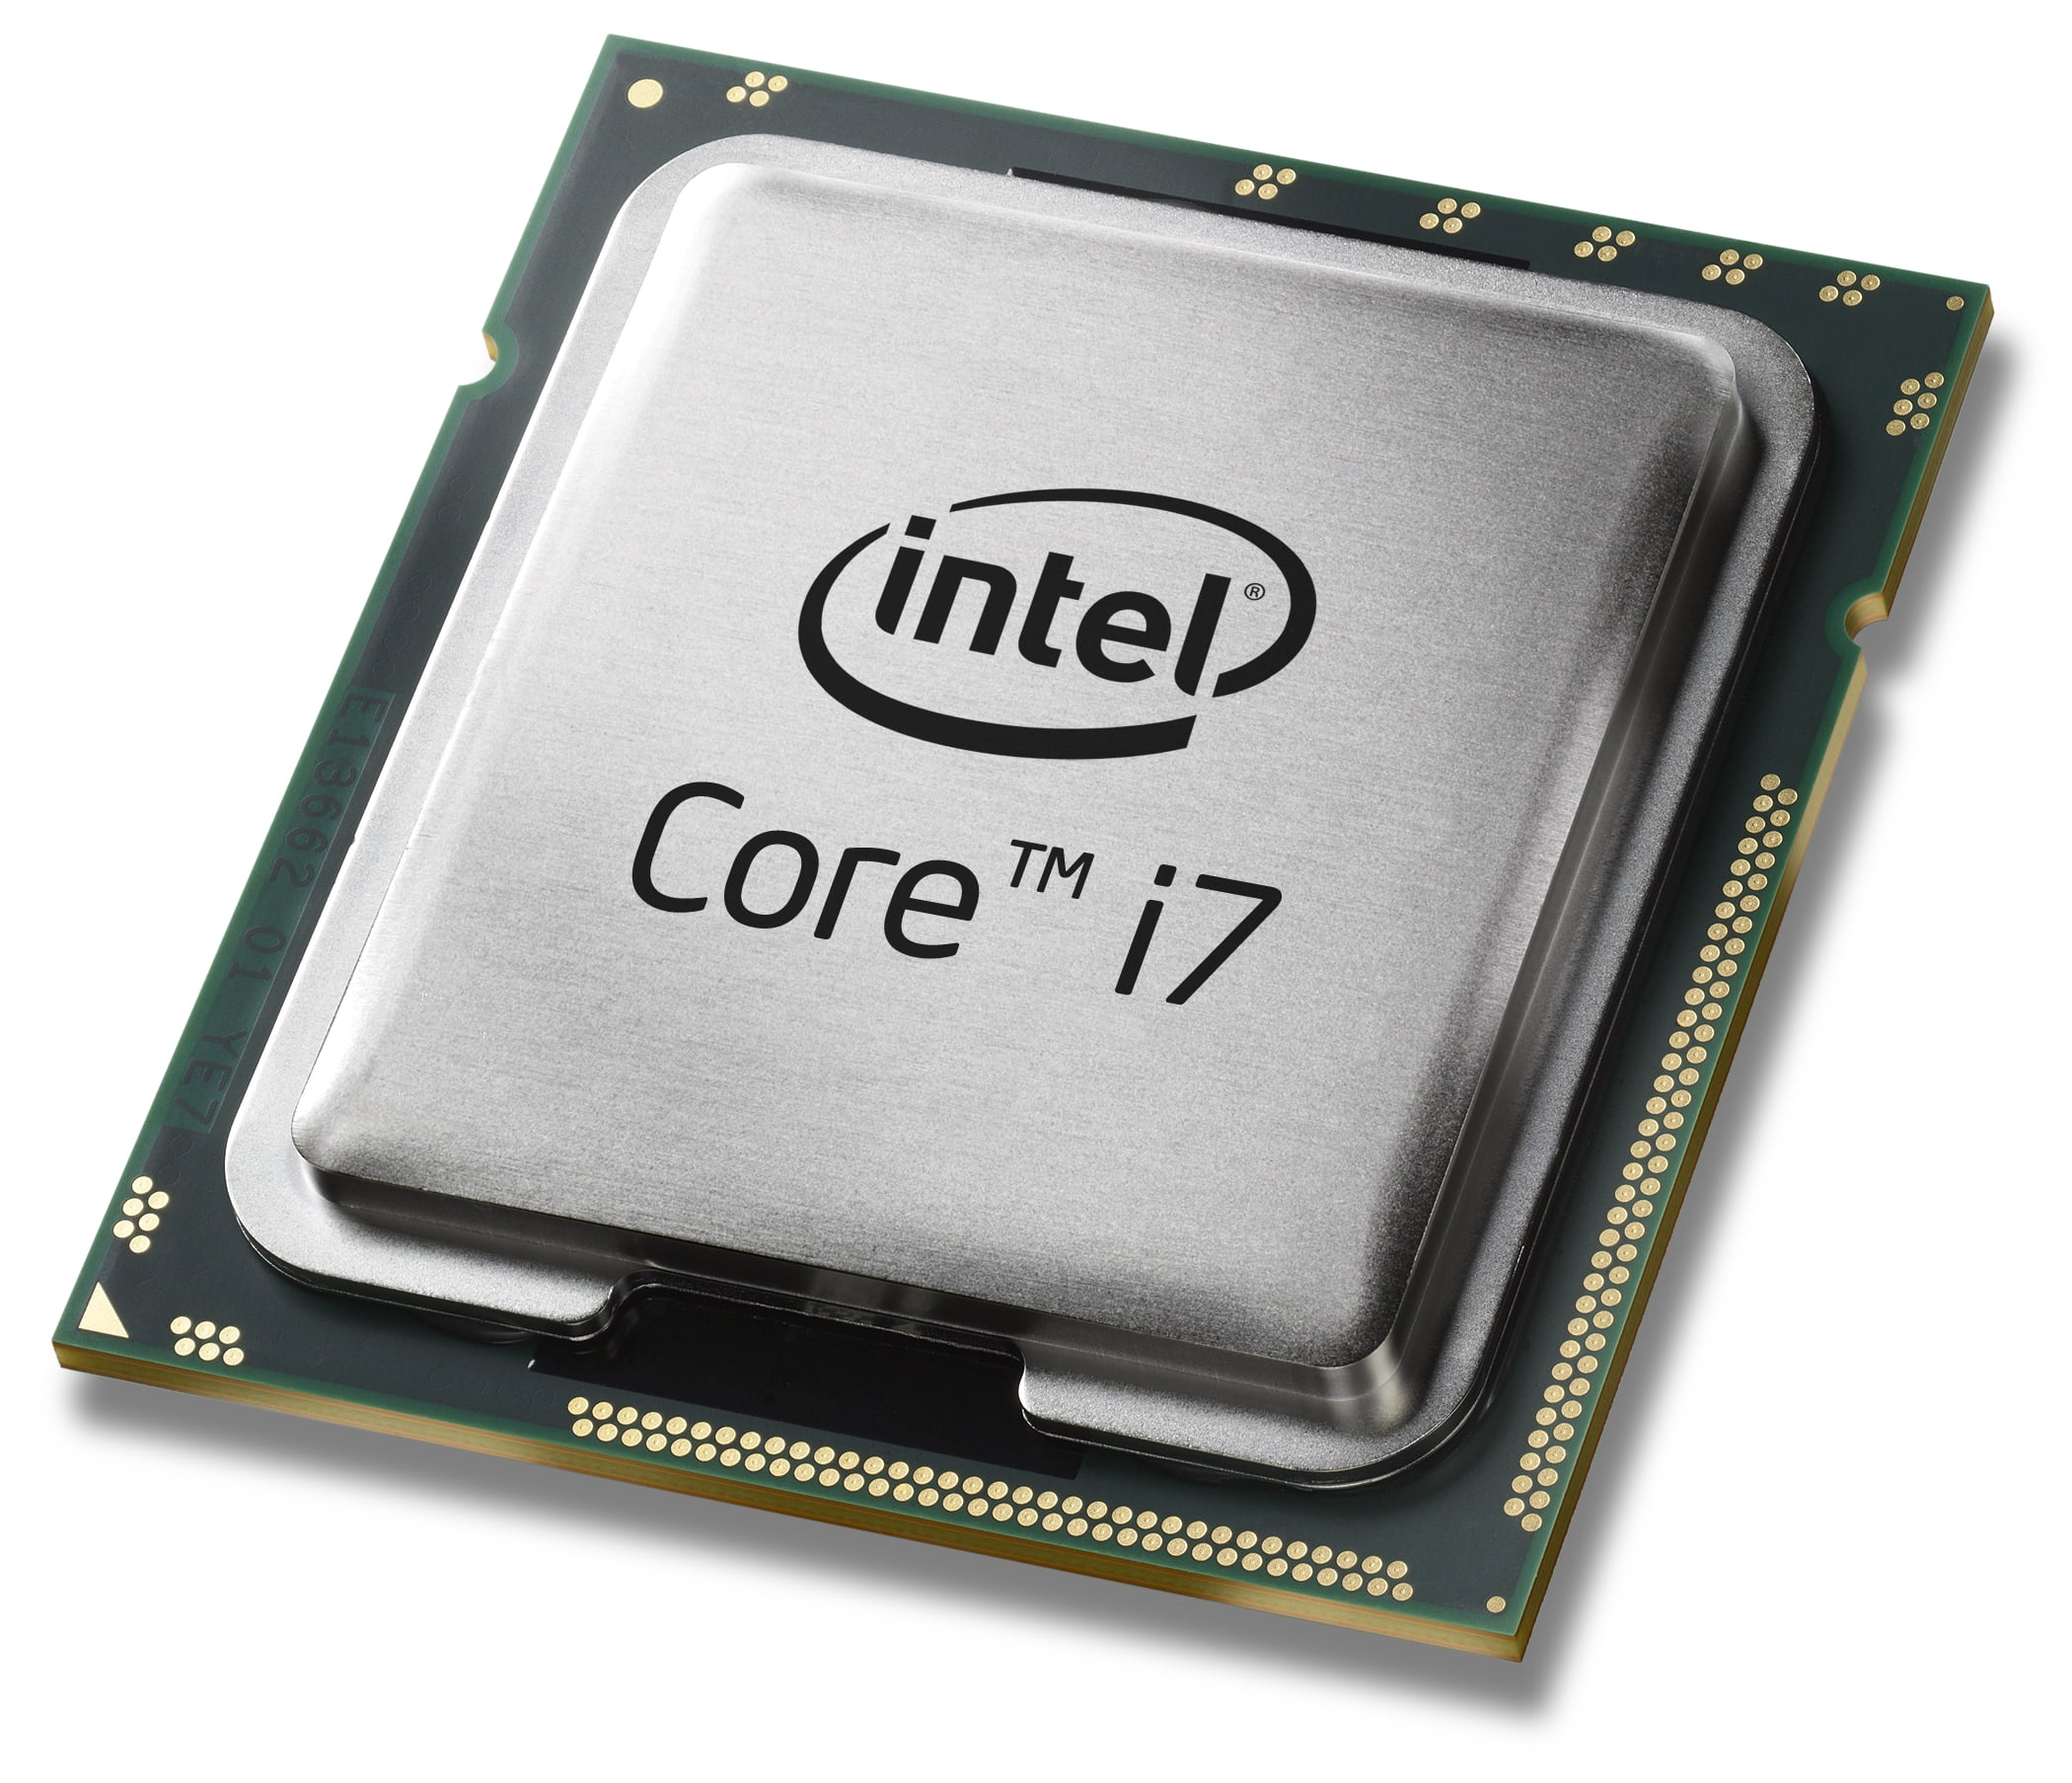 3570K Boxed Intel Core i5 3.4GHz Processor 6MB L3 Cache 5GT/s Bus Speed Certified Refurbished